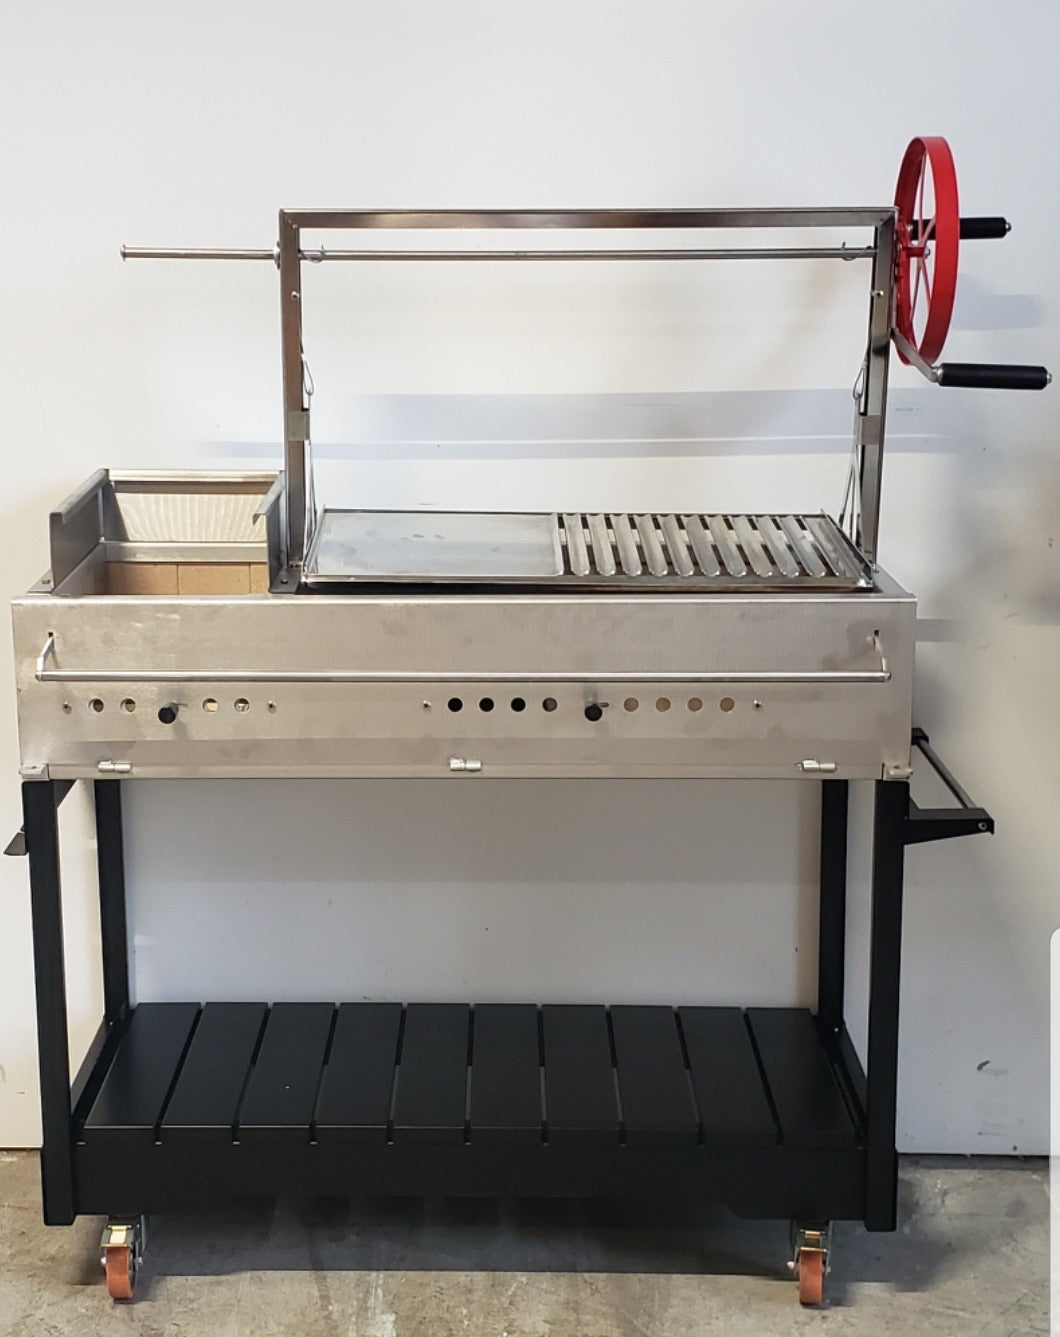 Argentinian Grill - Stainless Steel with cart